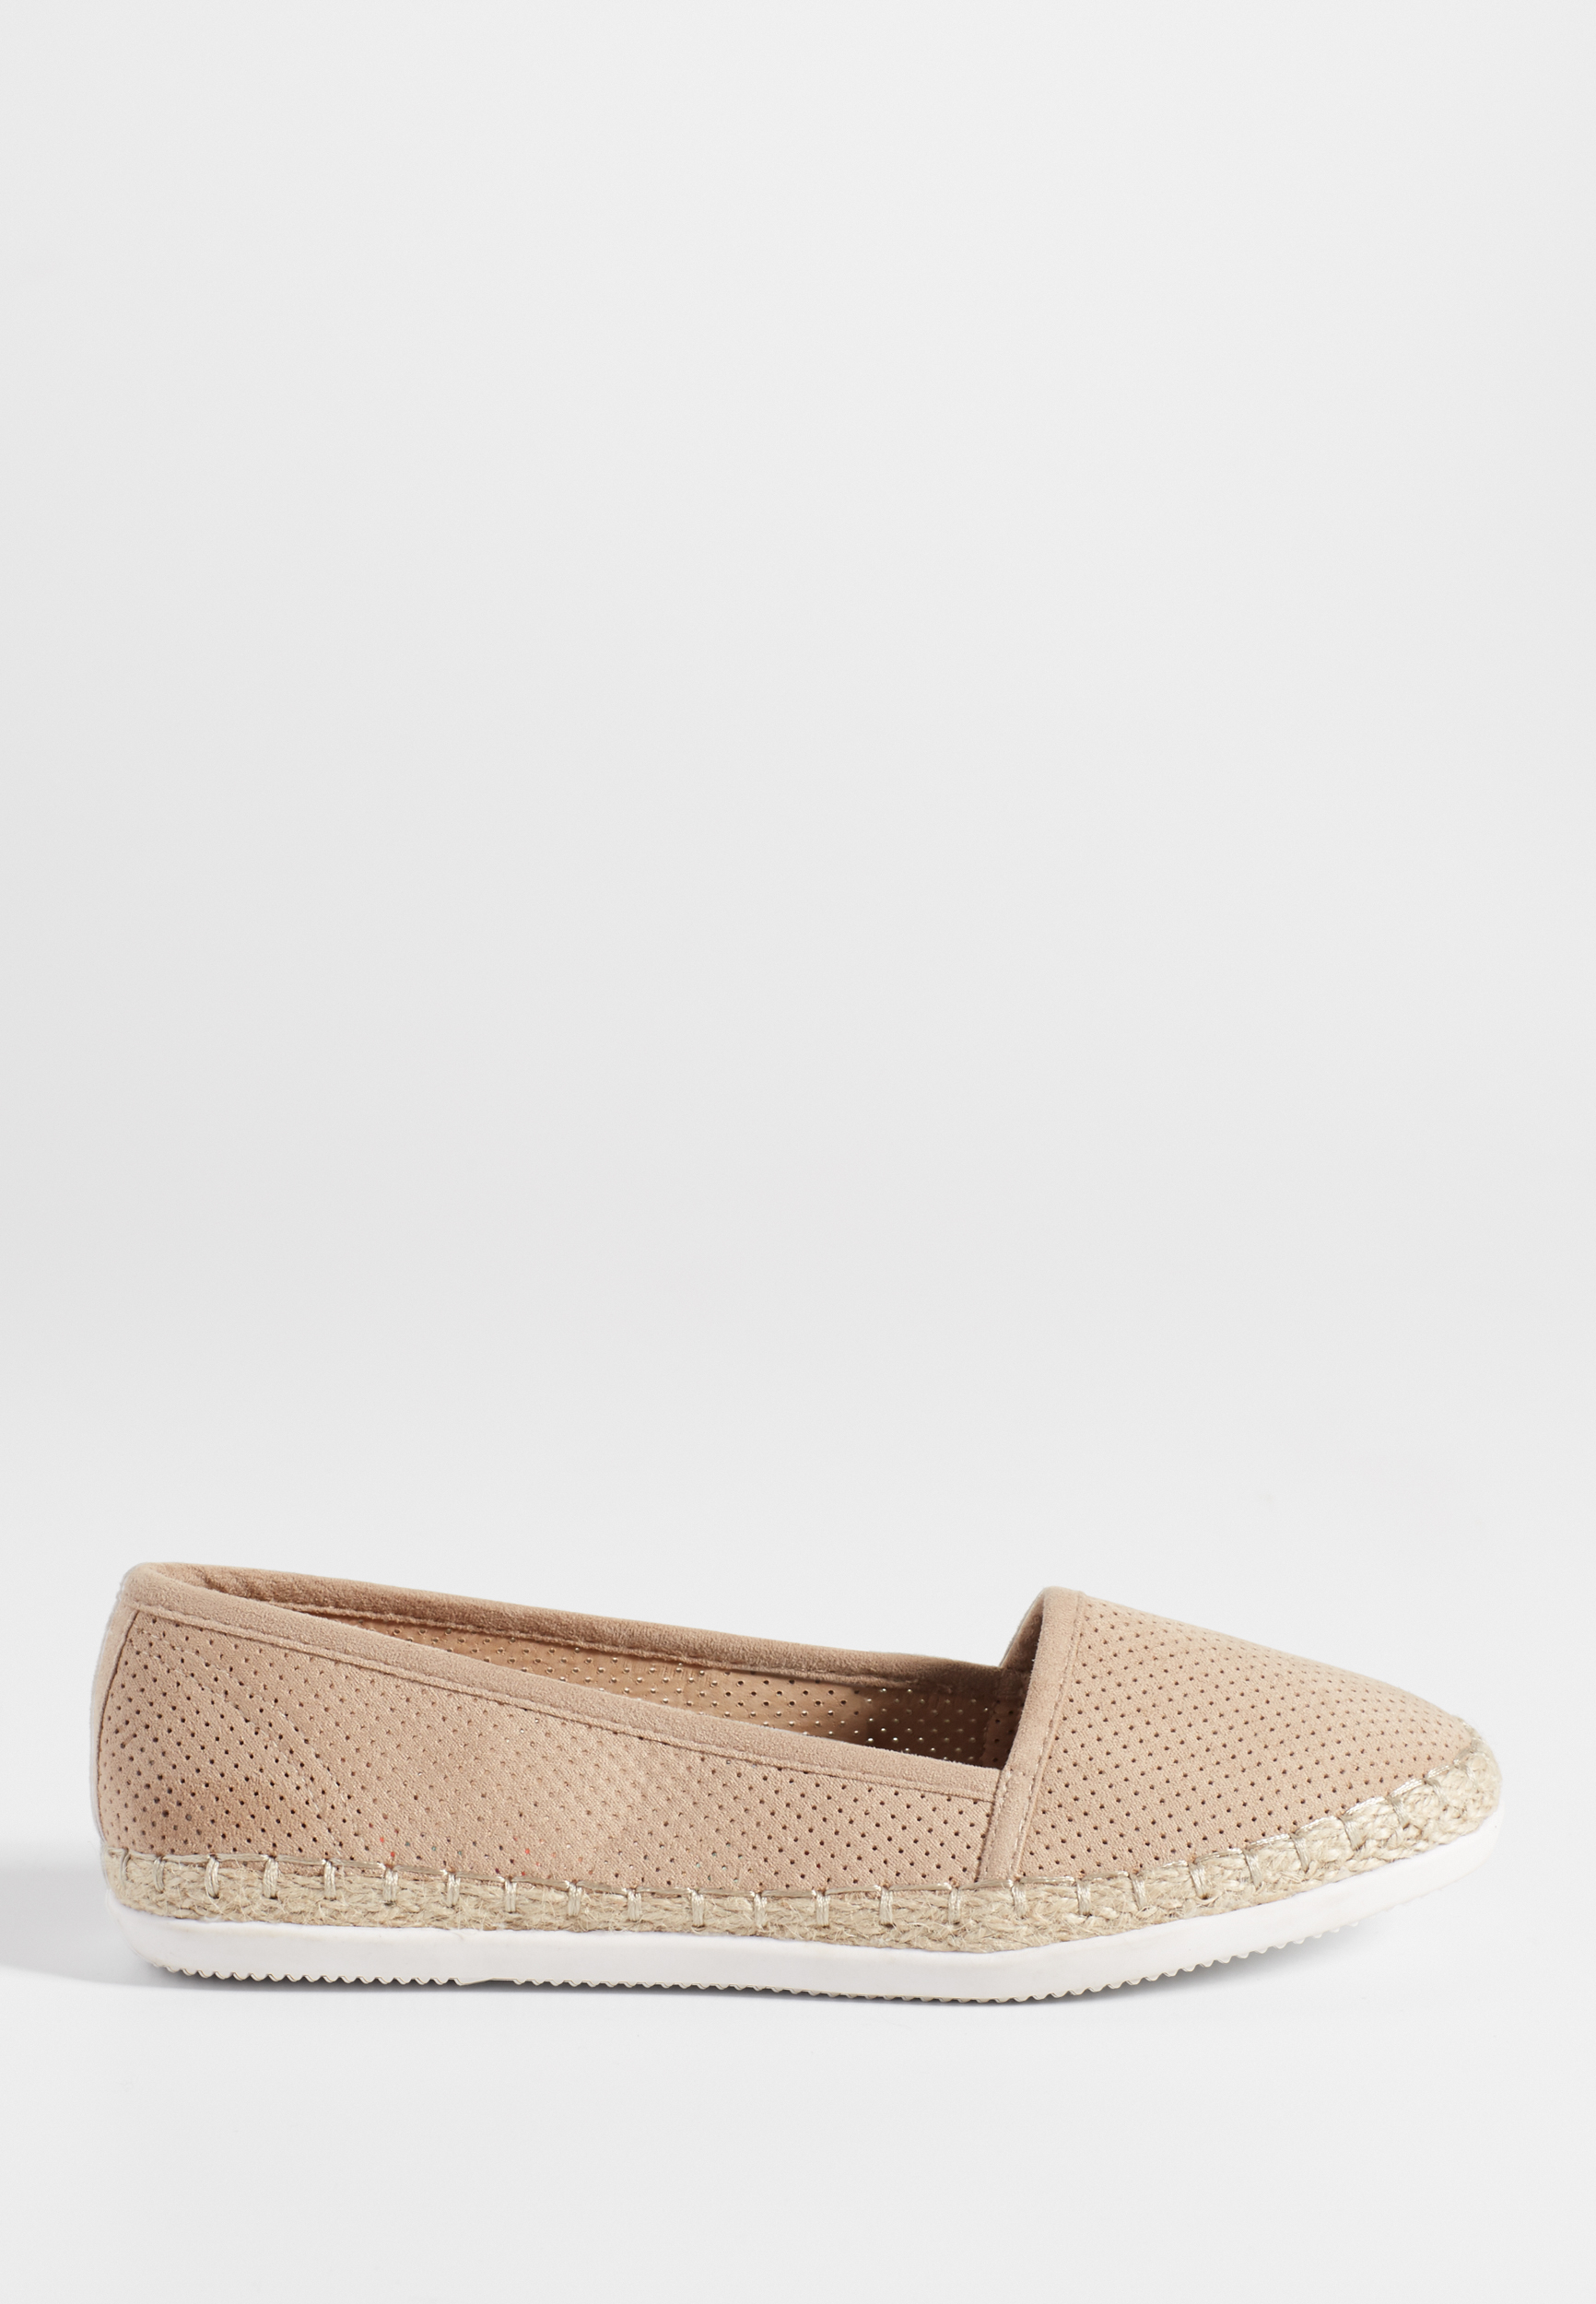 Lydia faux suede espadrille flat in tan | maurices